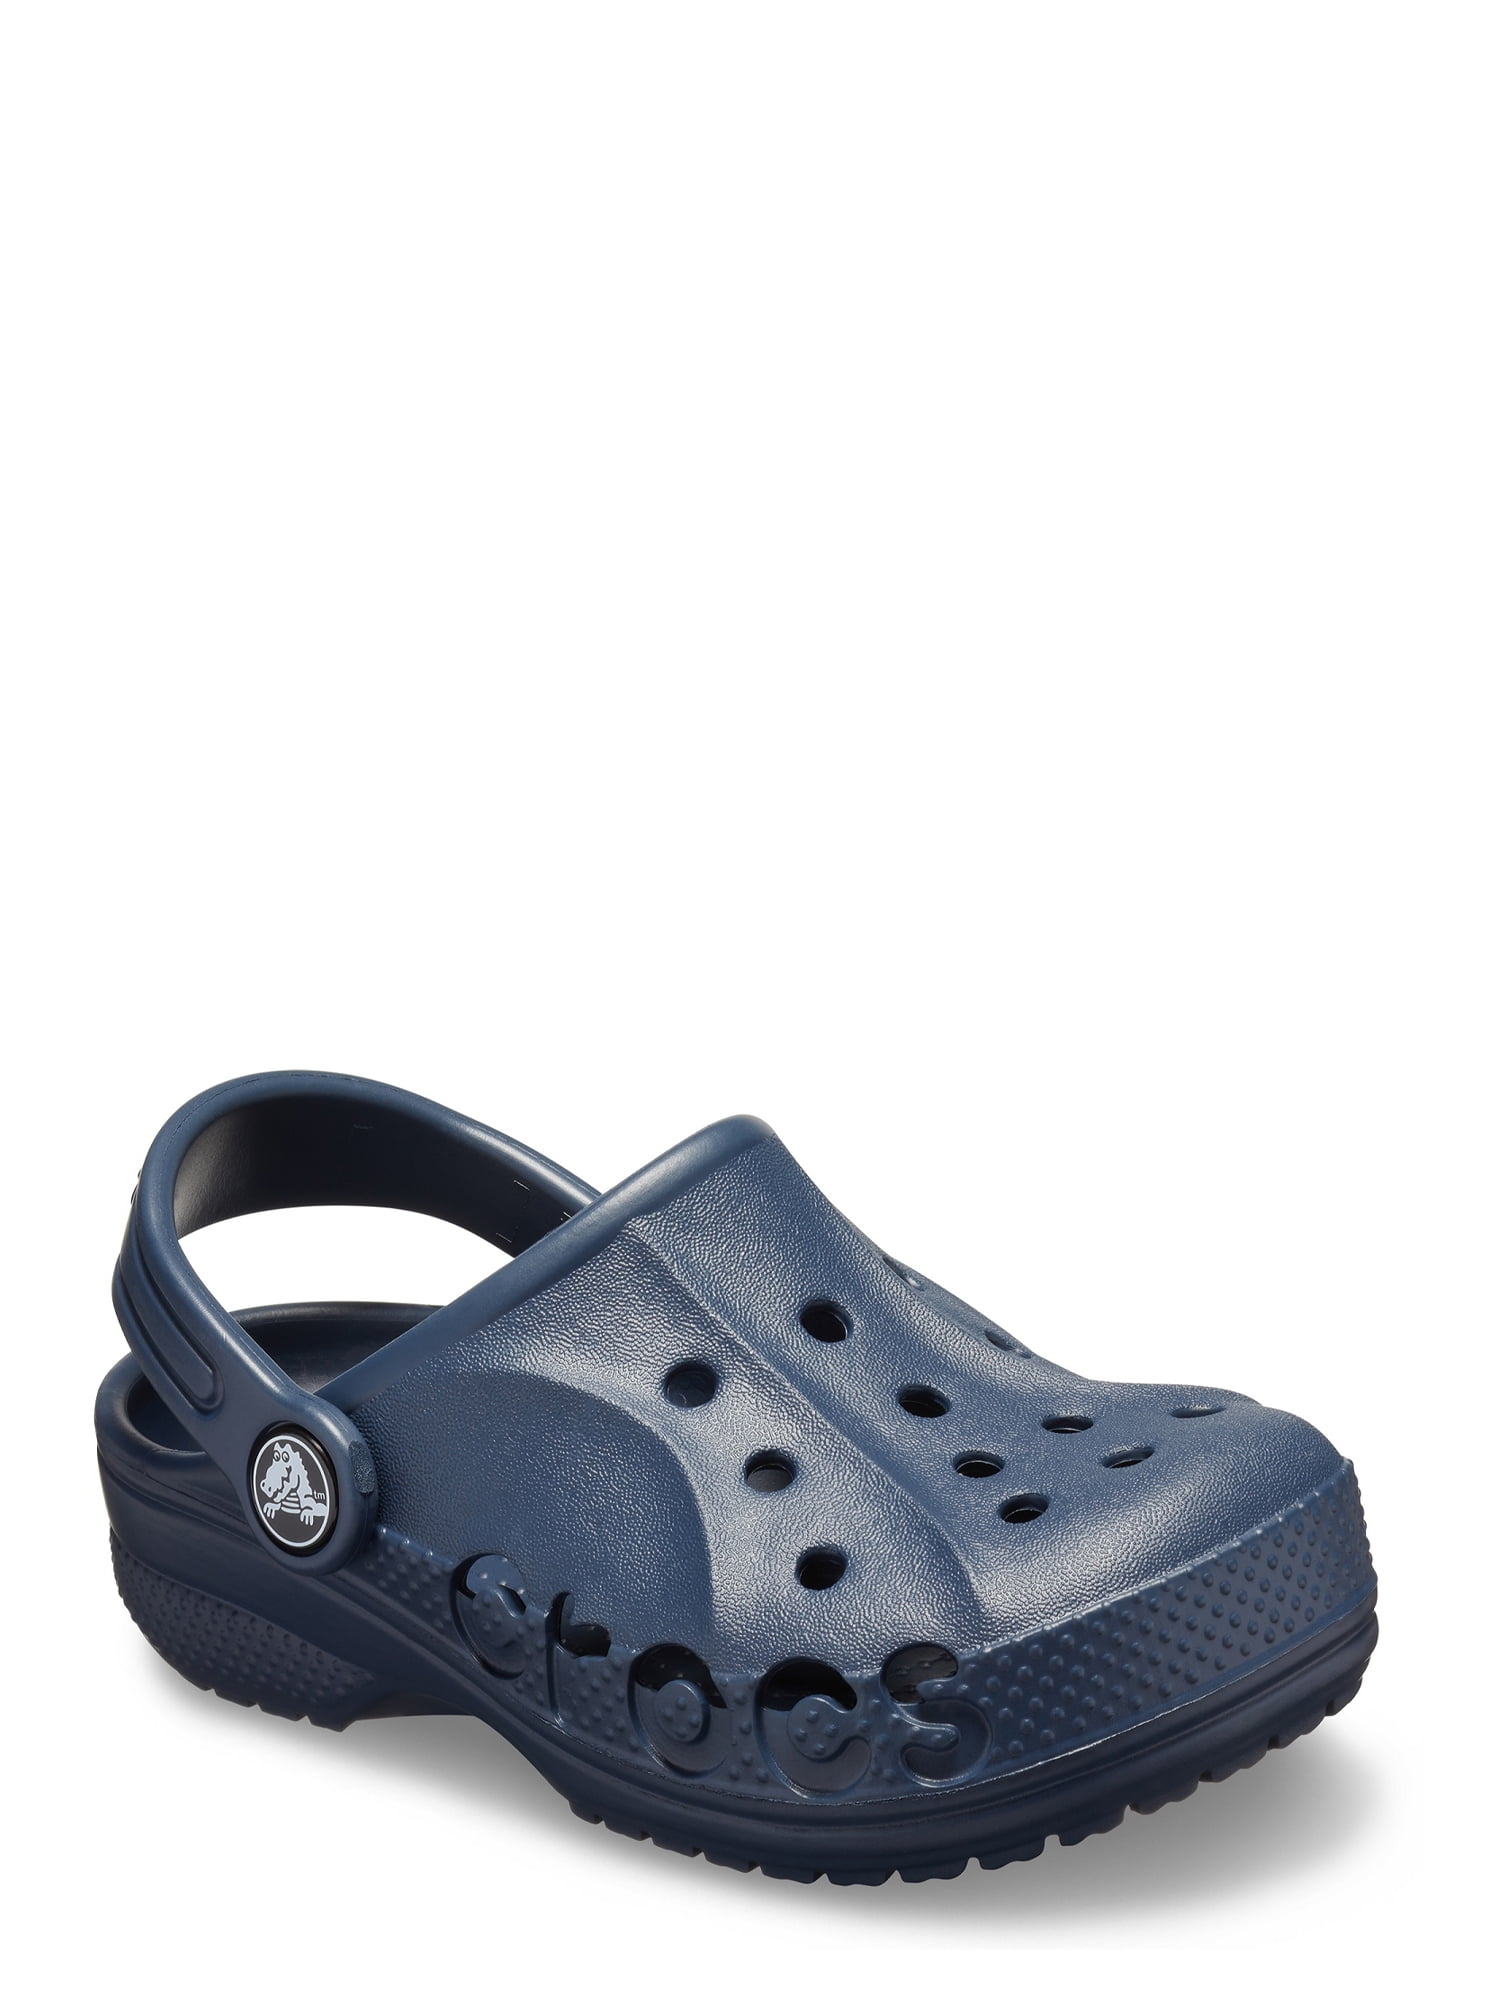 crocs for toddlers walmart